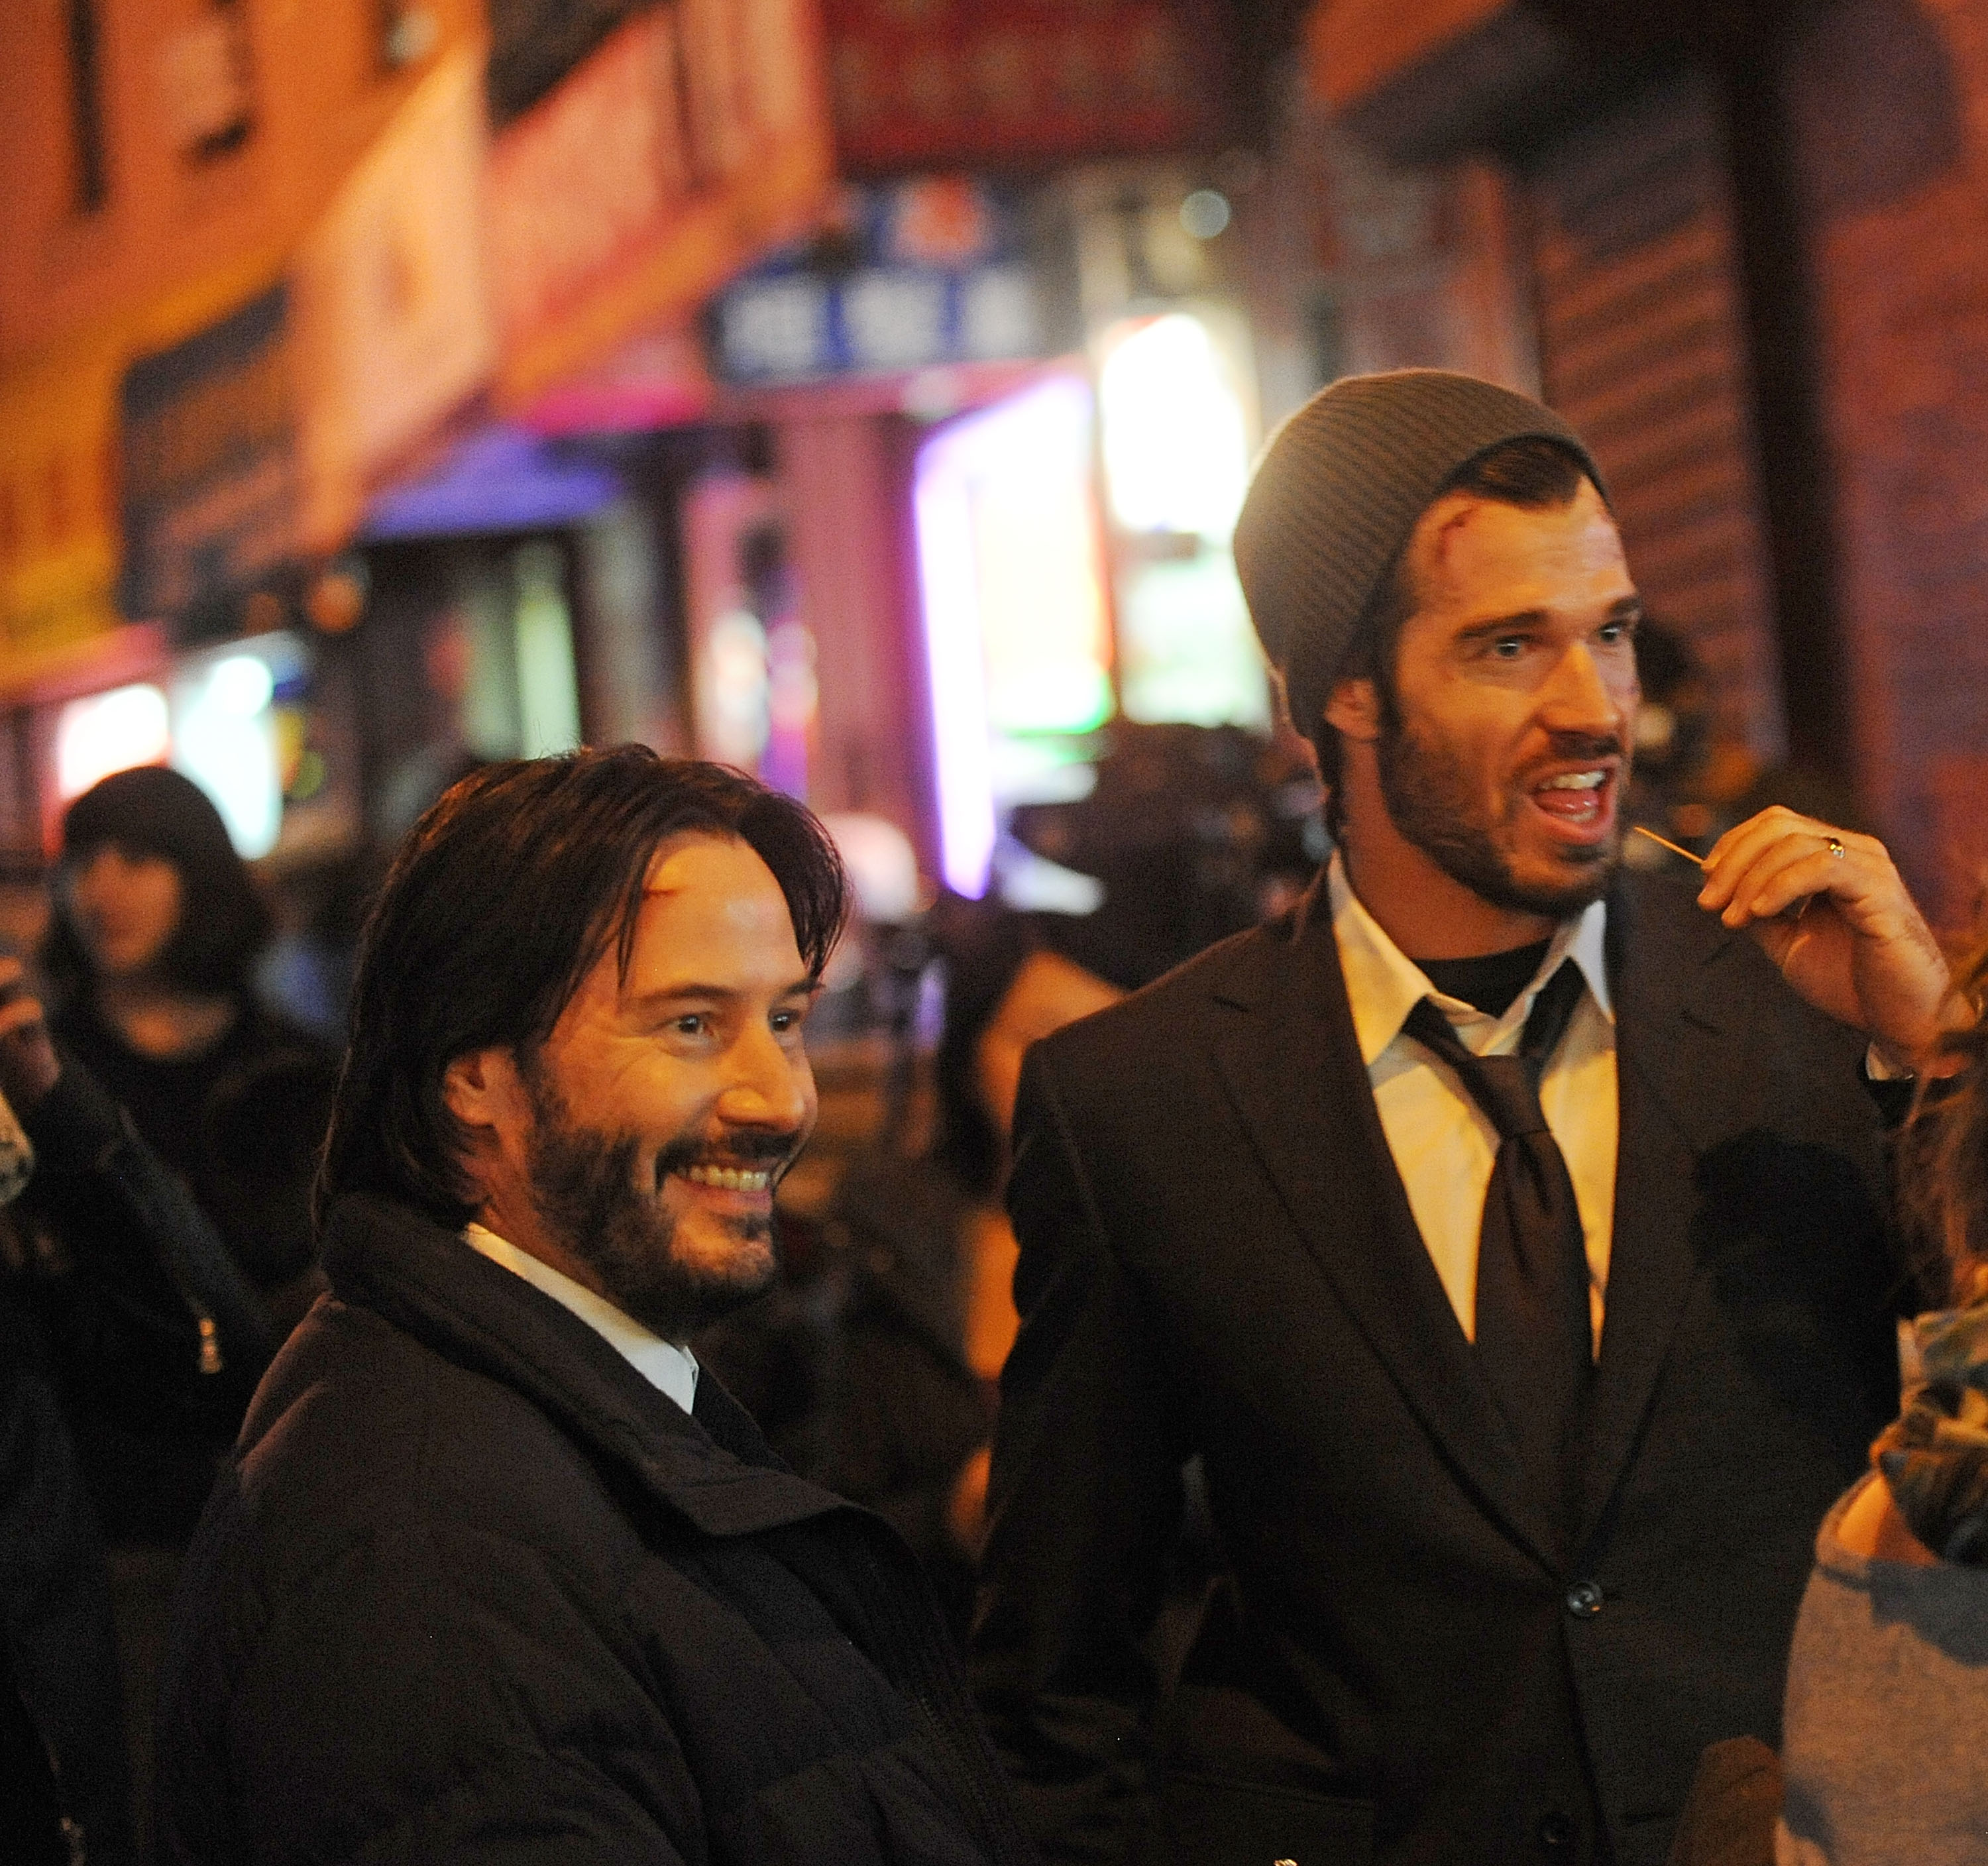 Keanu Reeves and his stunt double on the set of "John Wick 2" in New York City, on November 16, 2015. | Source: Getty Images